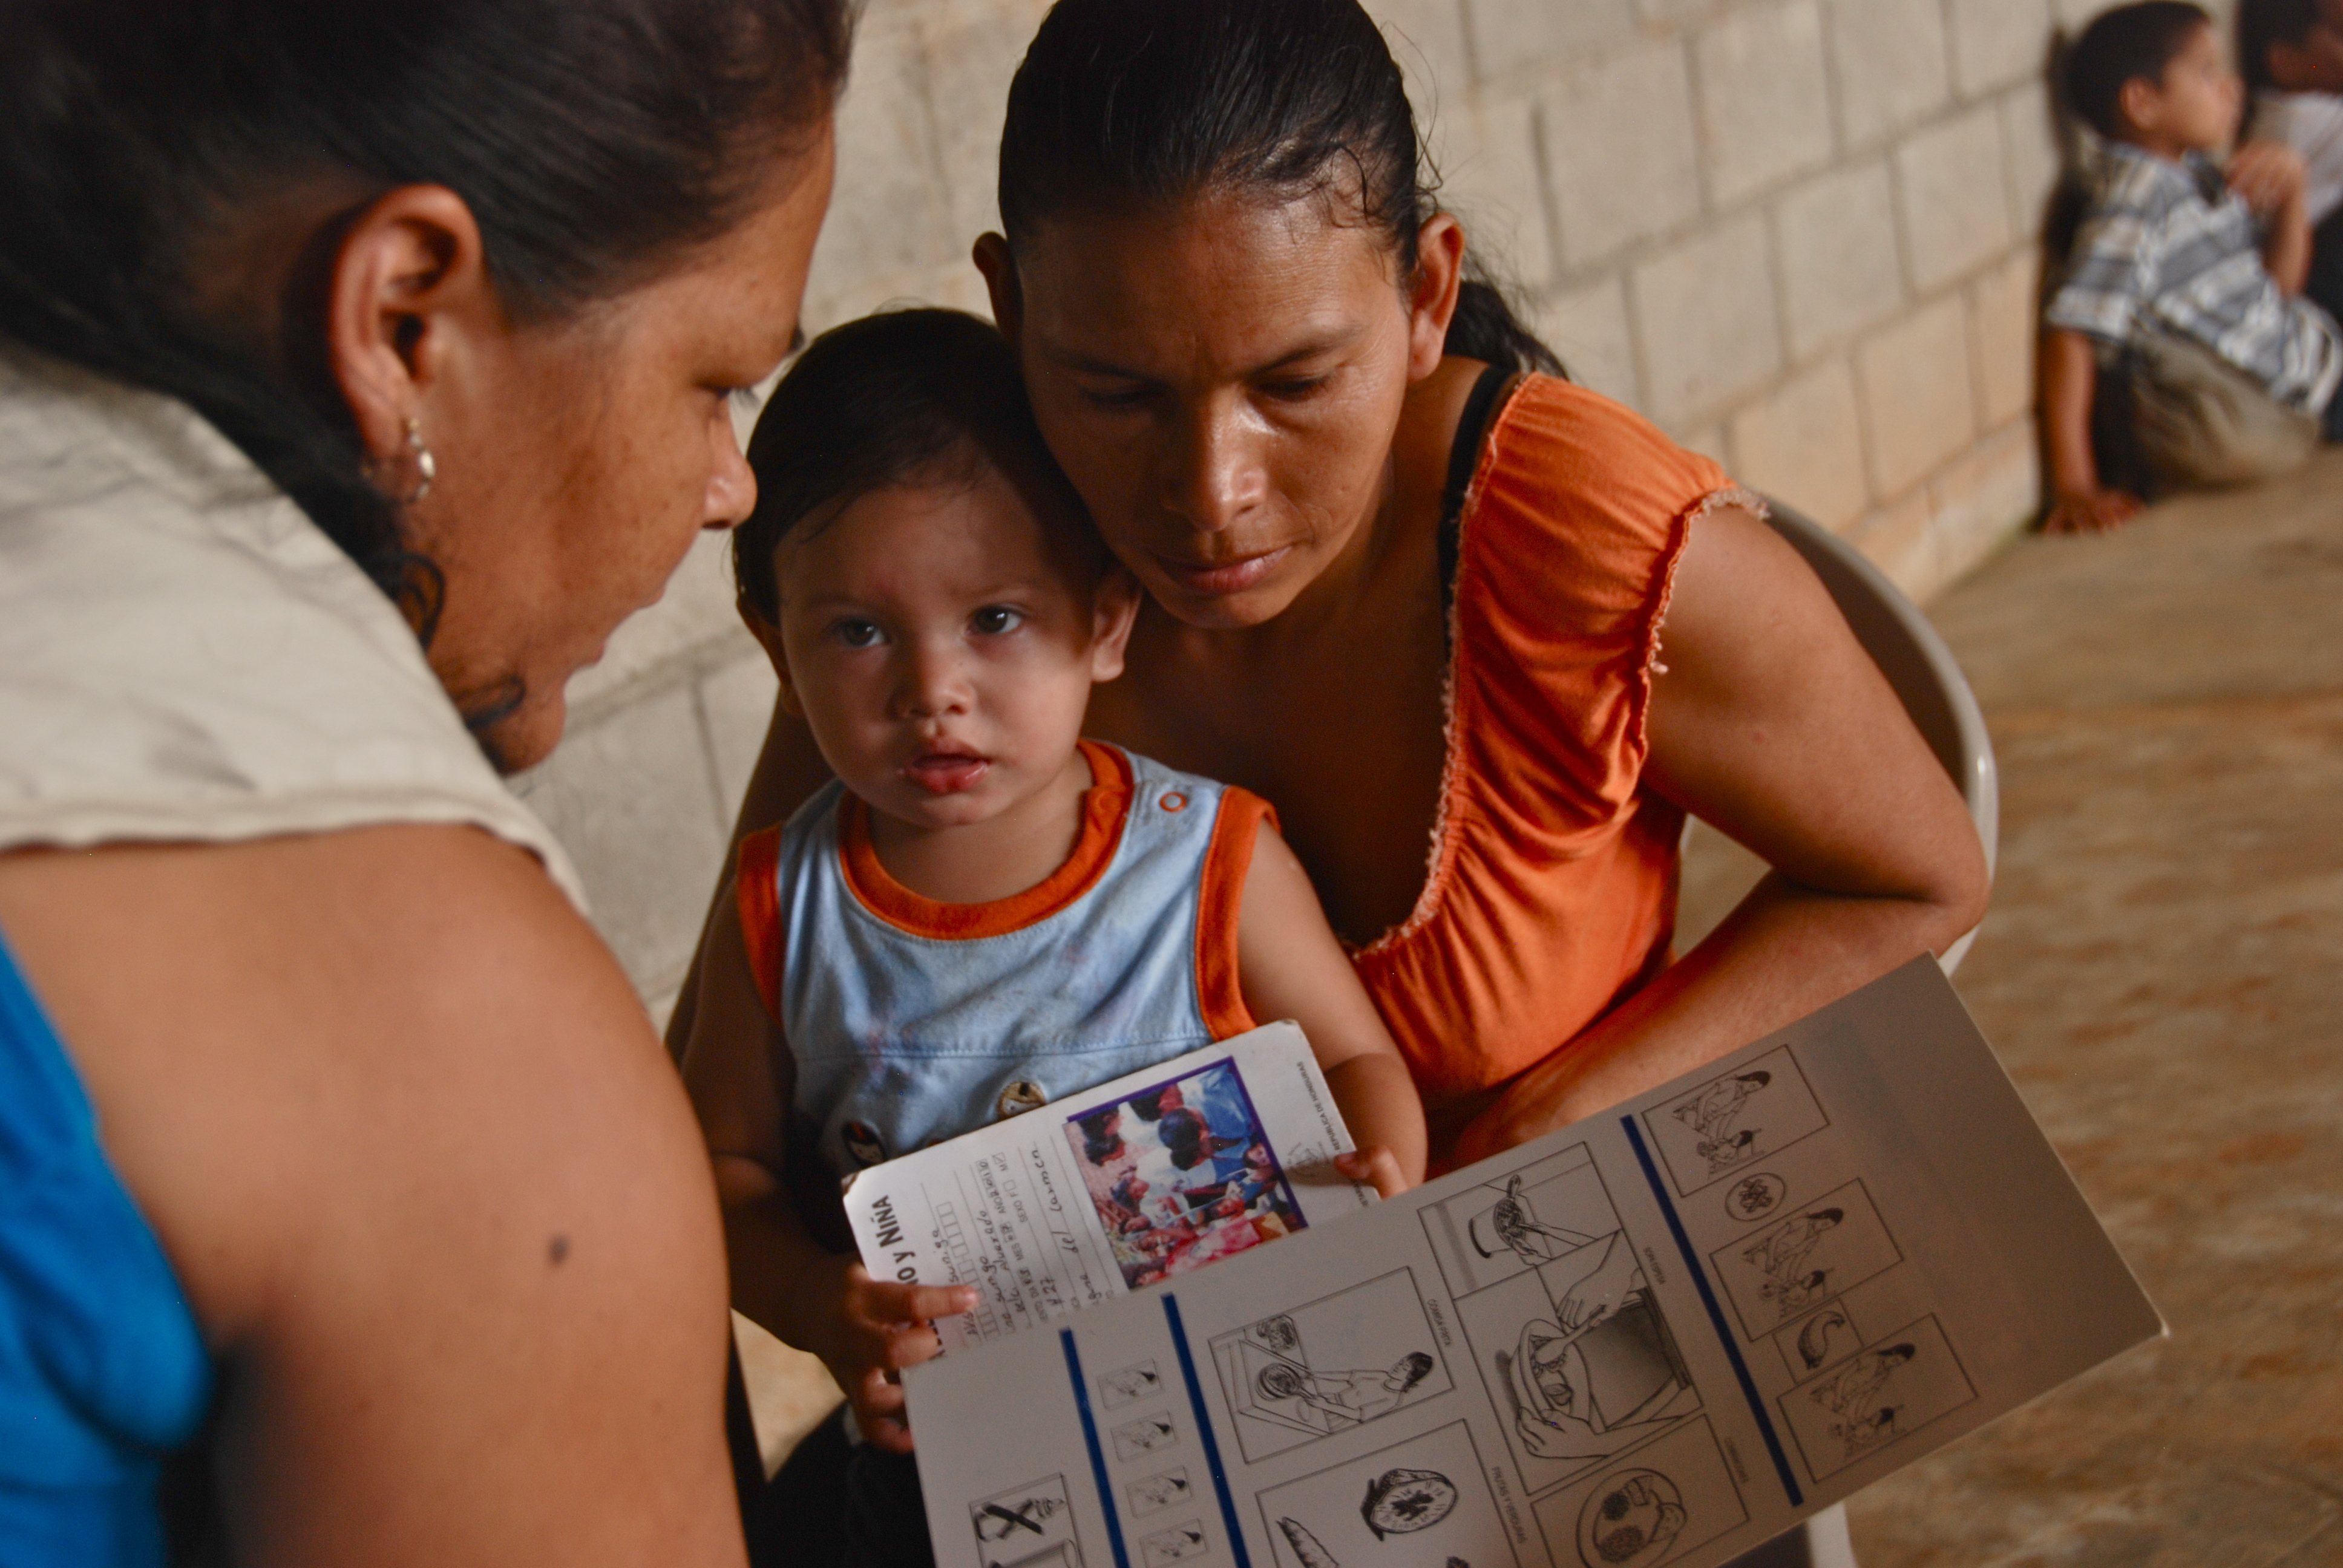 A Bolivian Red Cross volunteer teaches a Bolivian woman about child nutrition, part of a program to reduce deaths of children under 5.